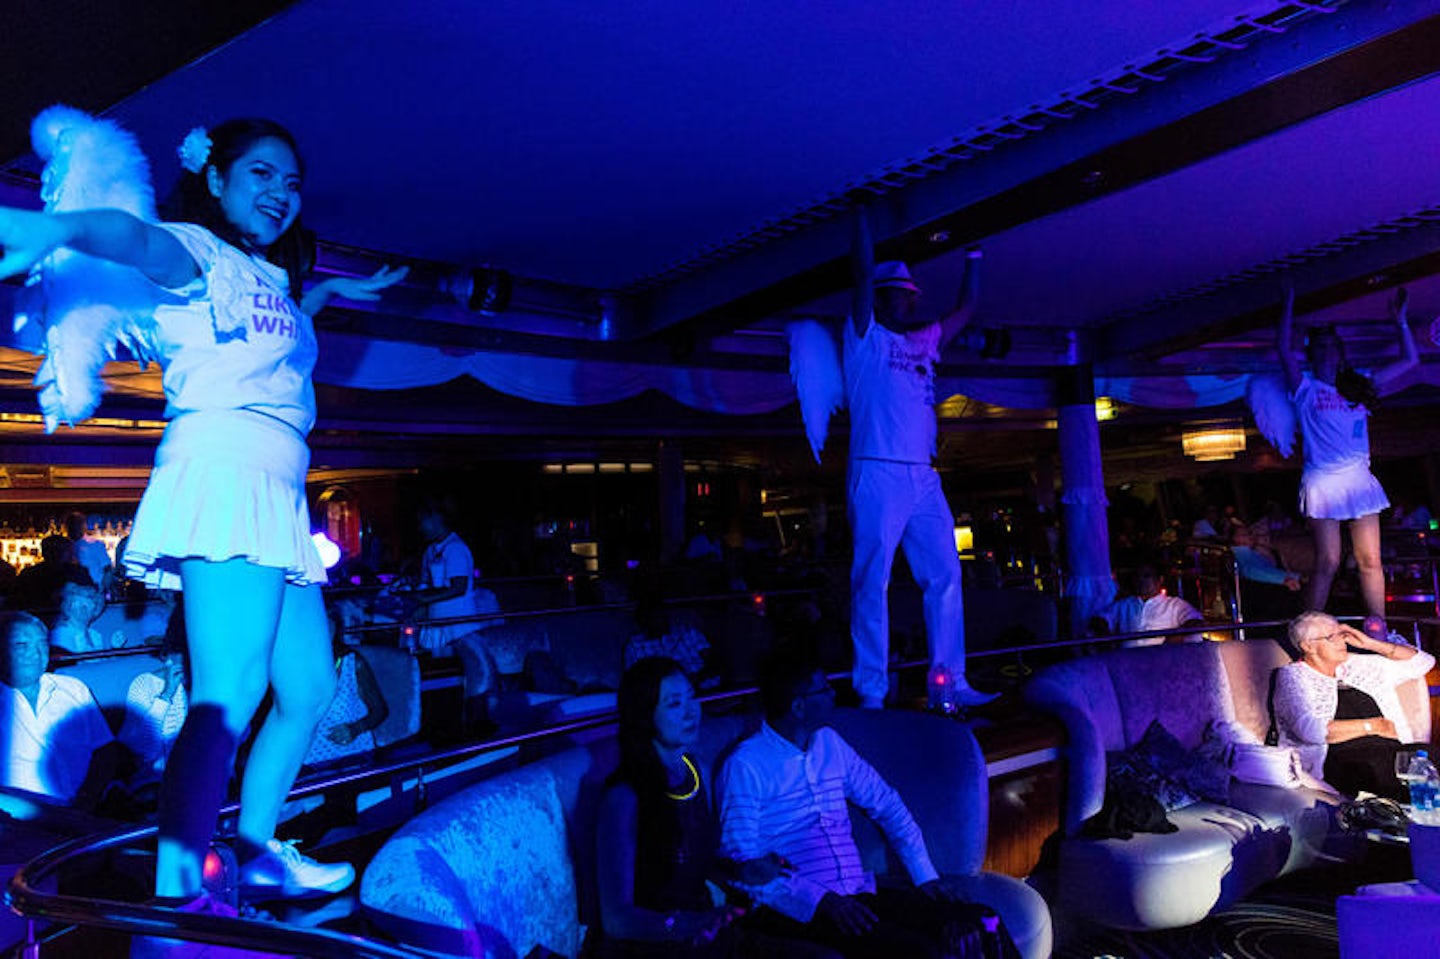 White Hot Party at Spinnaker Lounge on Norwegian Jade